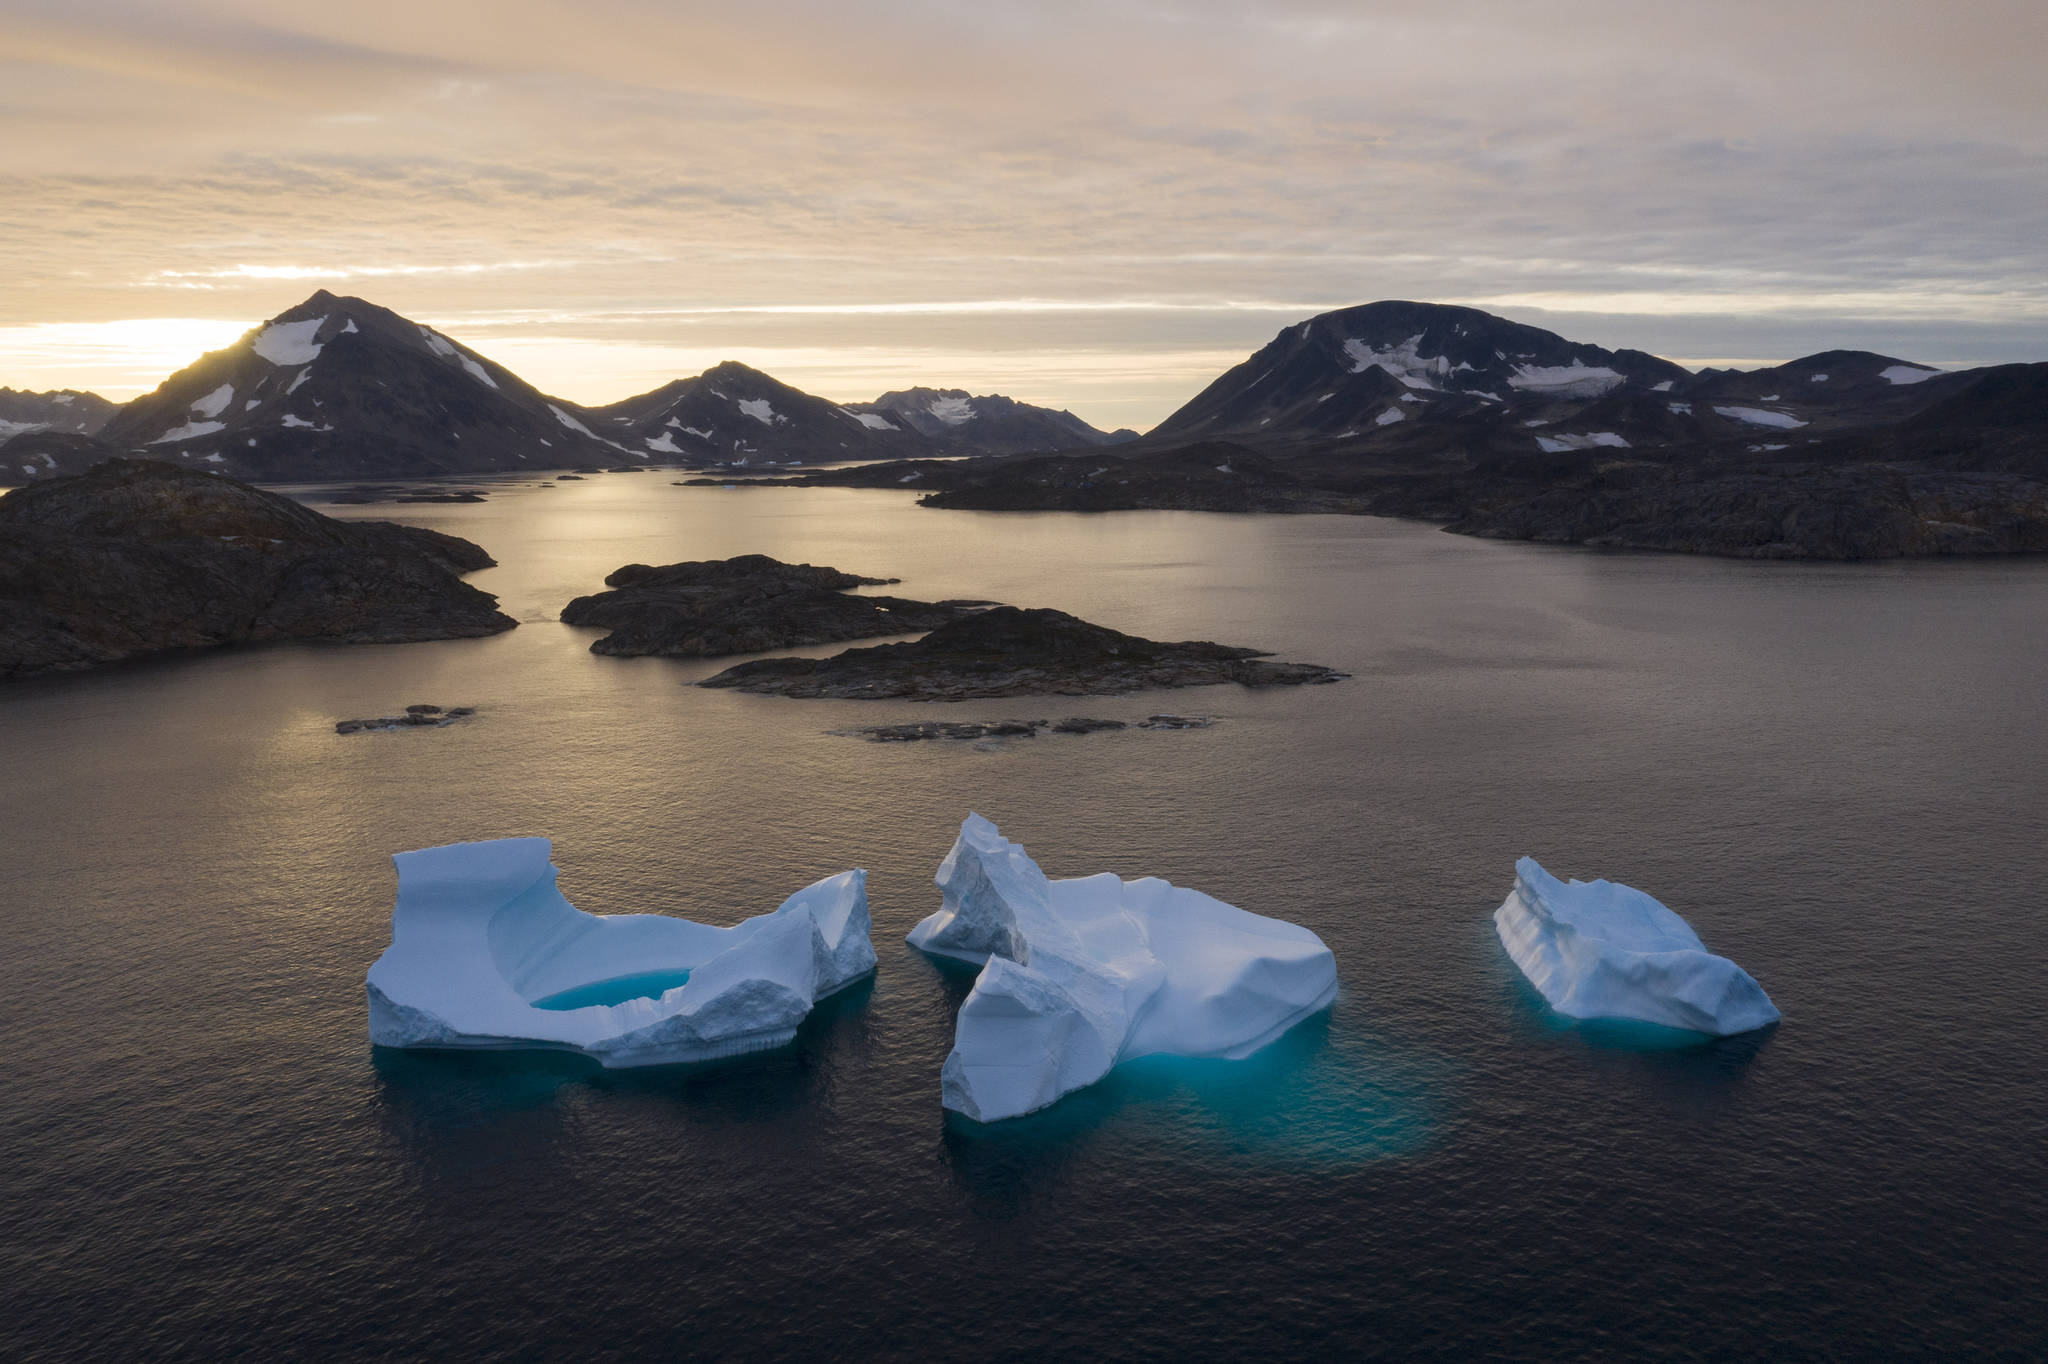 In this Aug. 16 photo, large icebergs float away as the sun rises near Kulusuk, Greenland. Rising temperatures and diminished snow and ice cover in the Arctic are imperiling ecosystems, fisheries and local cultures, according to a report issued Tuesday, Dec. 10 by the National Oceanic and Atmospheric Administration. (AP Photo/Felipe Dana, File)